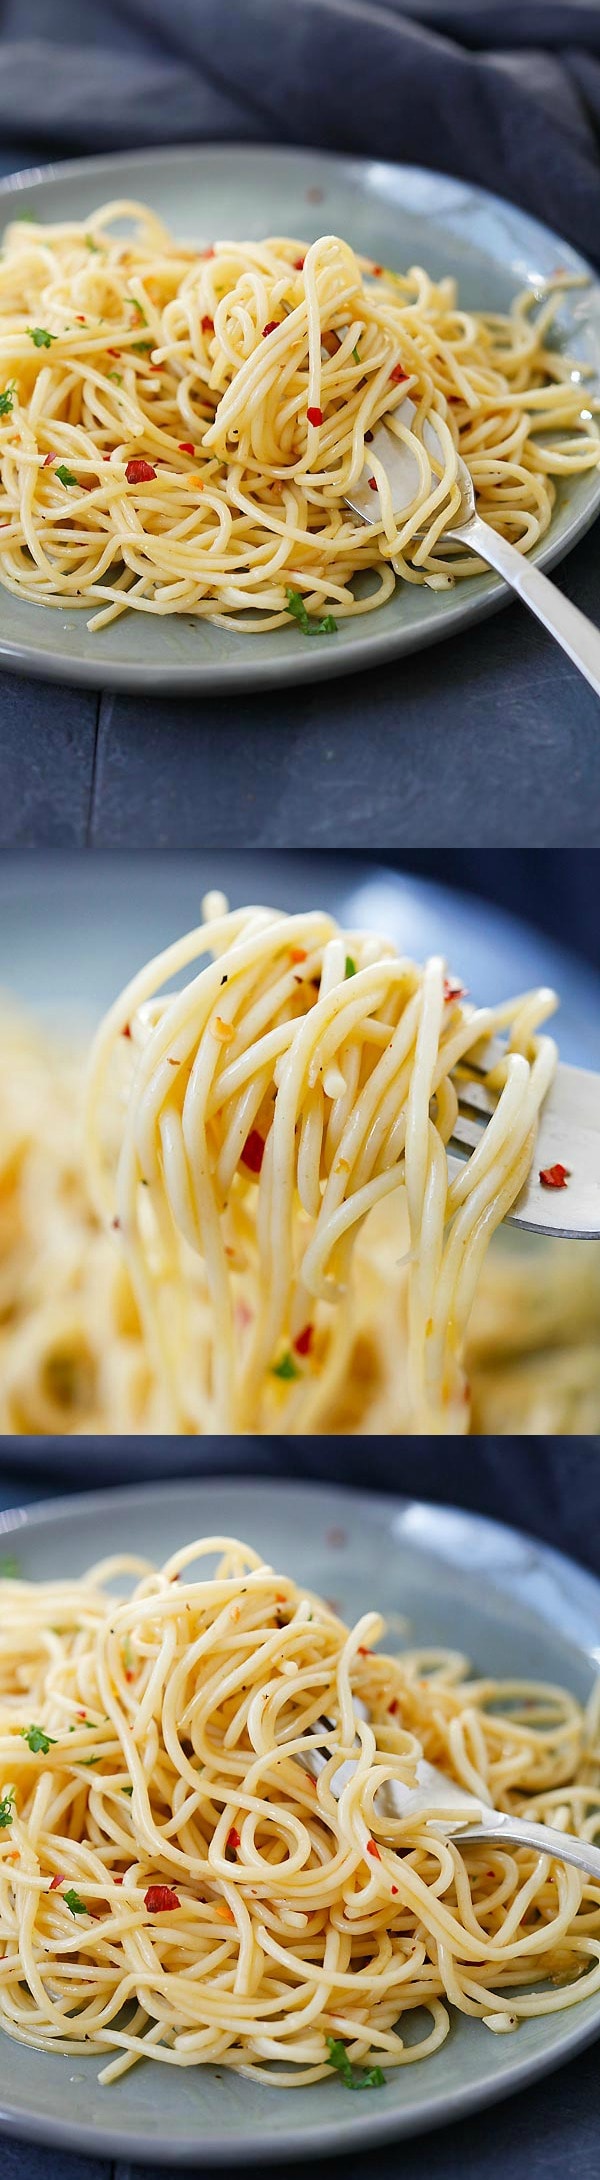 Easy Spaghetti - the easiest spaghetti you will ever make. Takes 15 minutes, budget-friendly, with simple ingredients and so delicious! | rasamalaysia.com